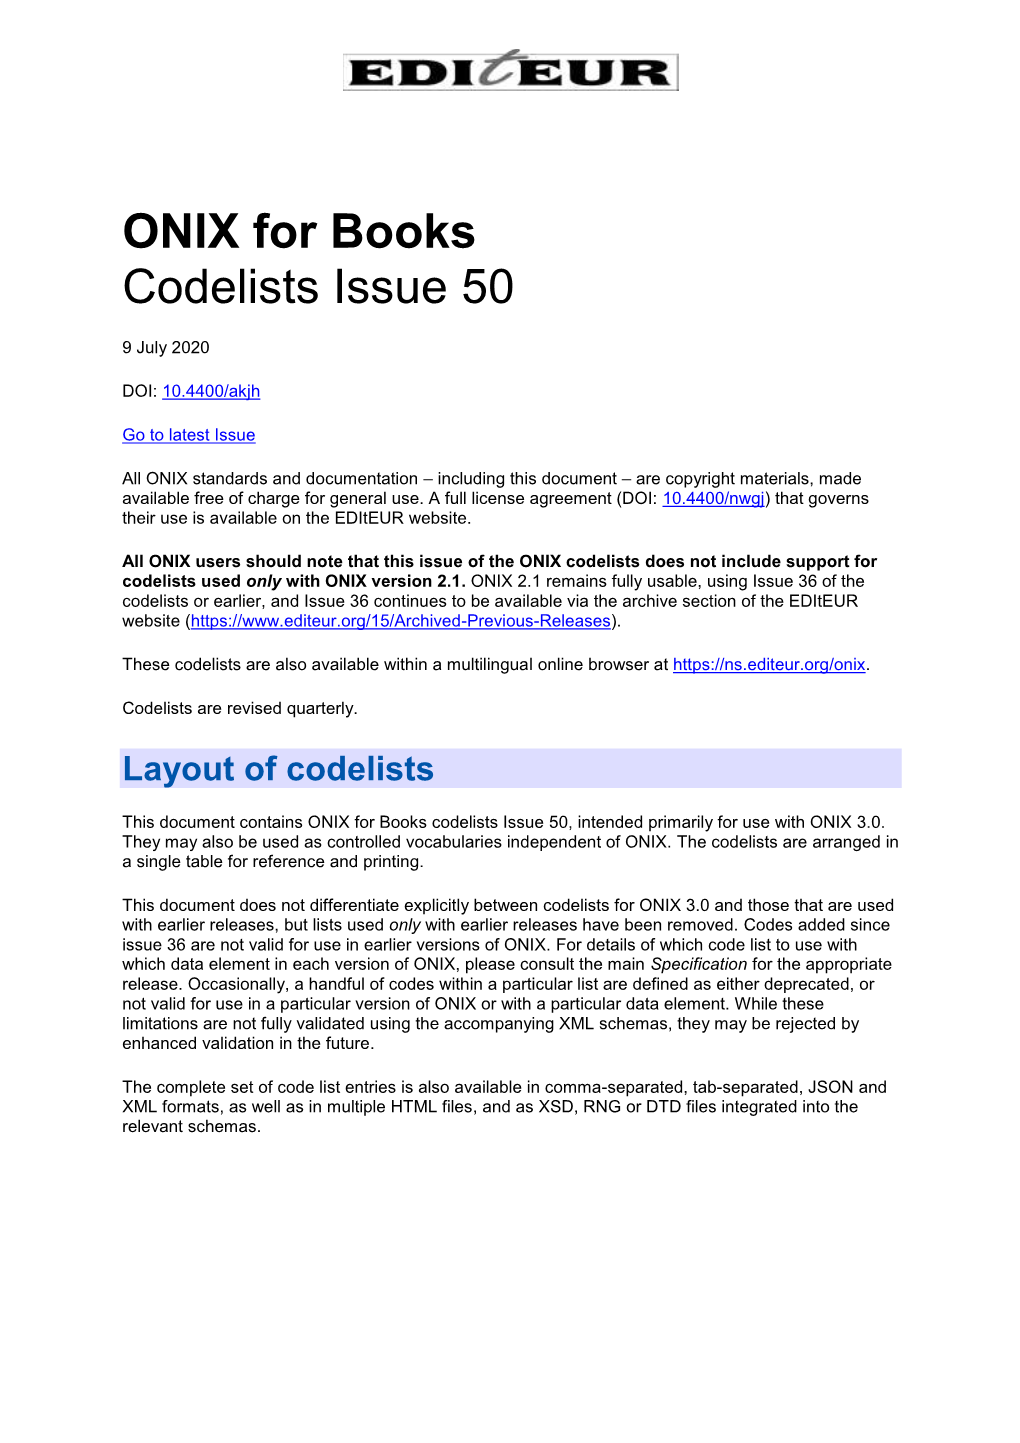 ONIX for Books Codelists Issue 50